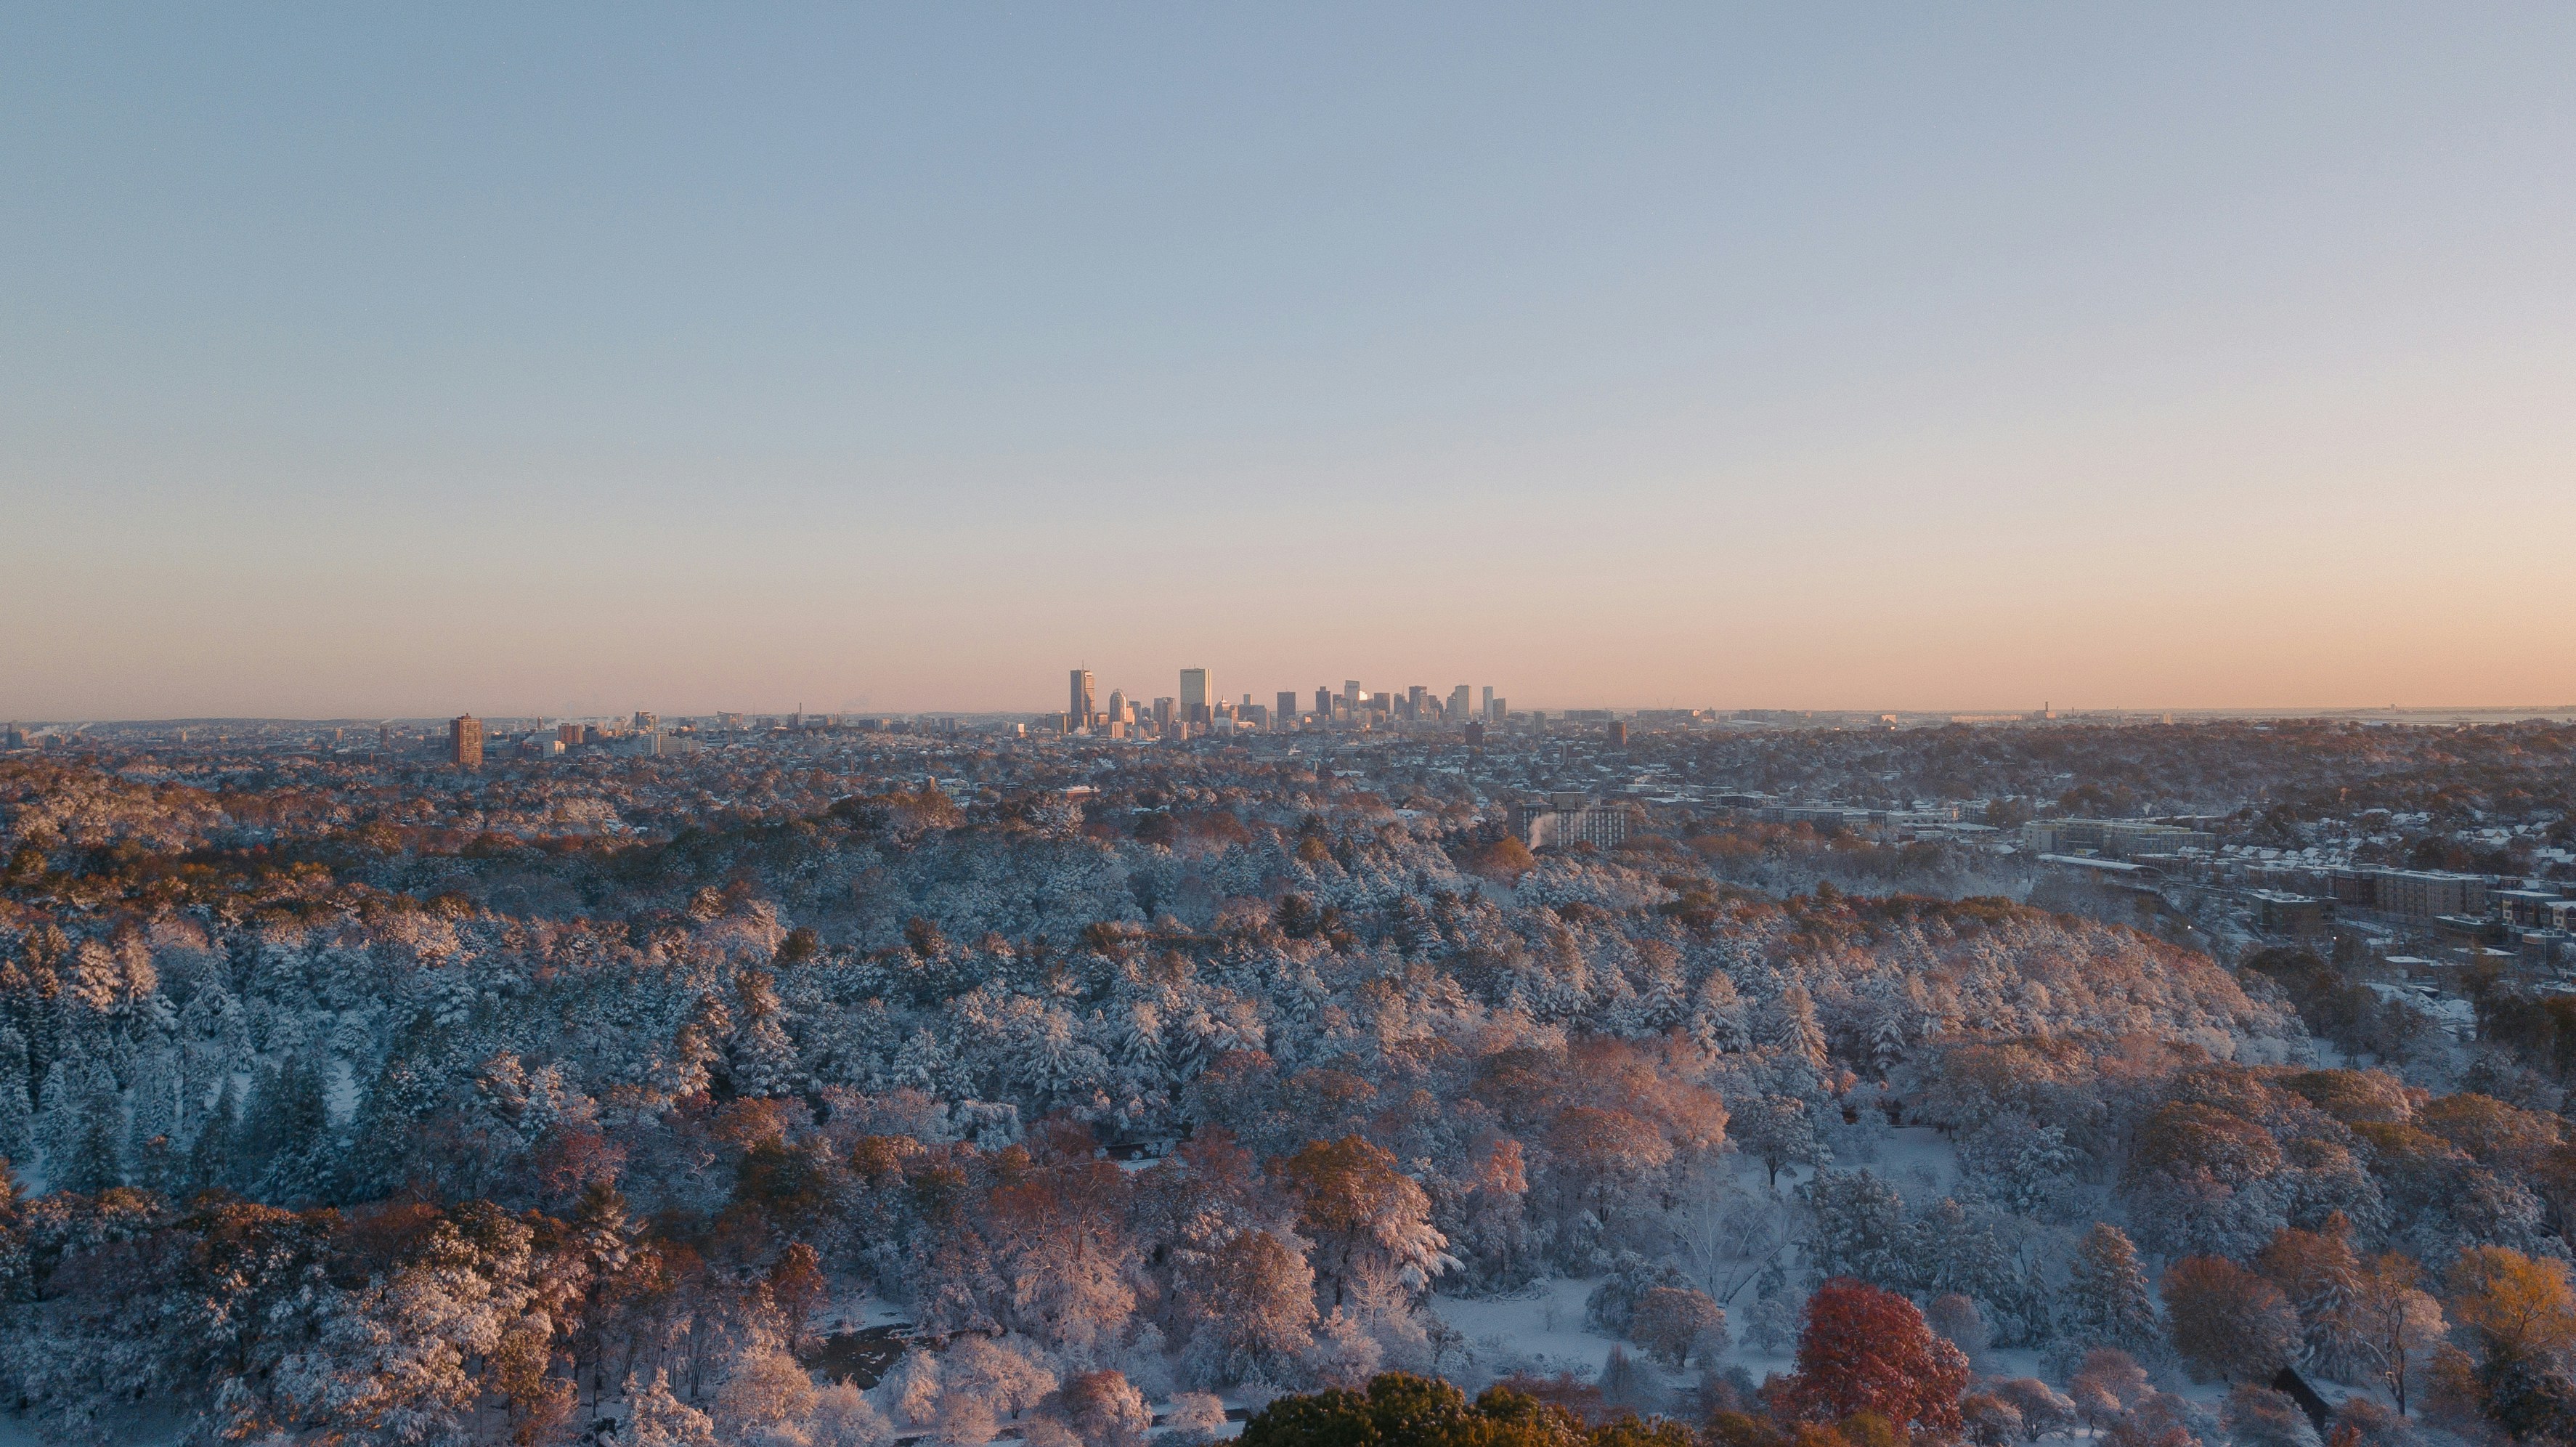 The sun rises over the Boston skyline after the first snowfall of the year.